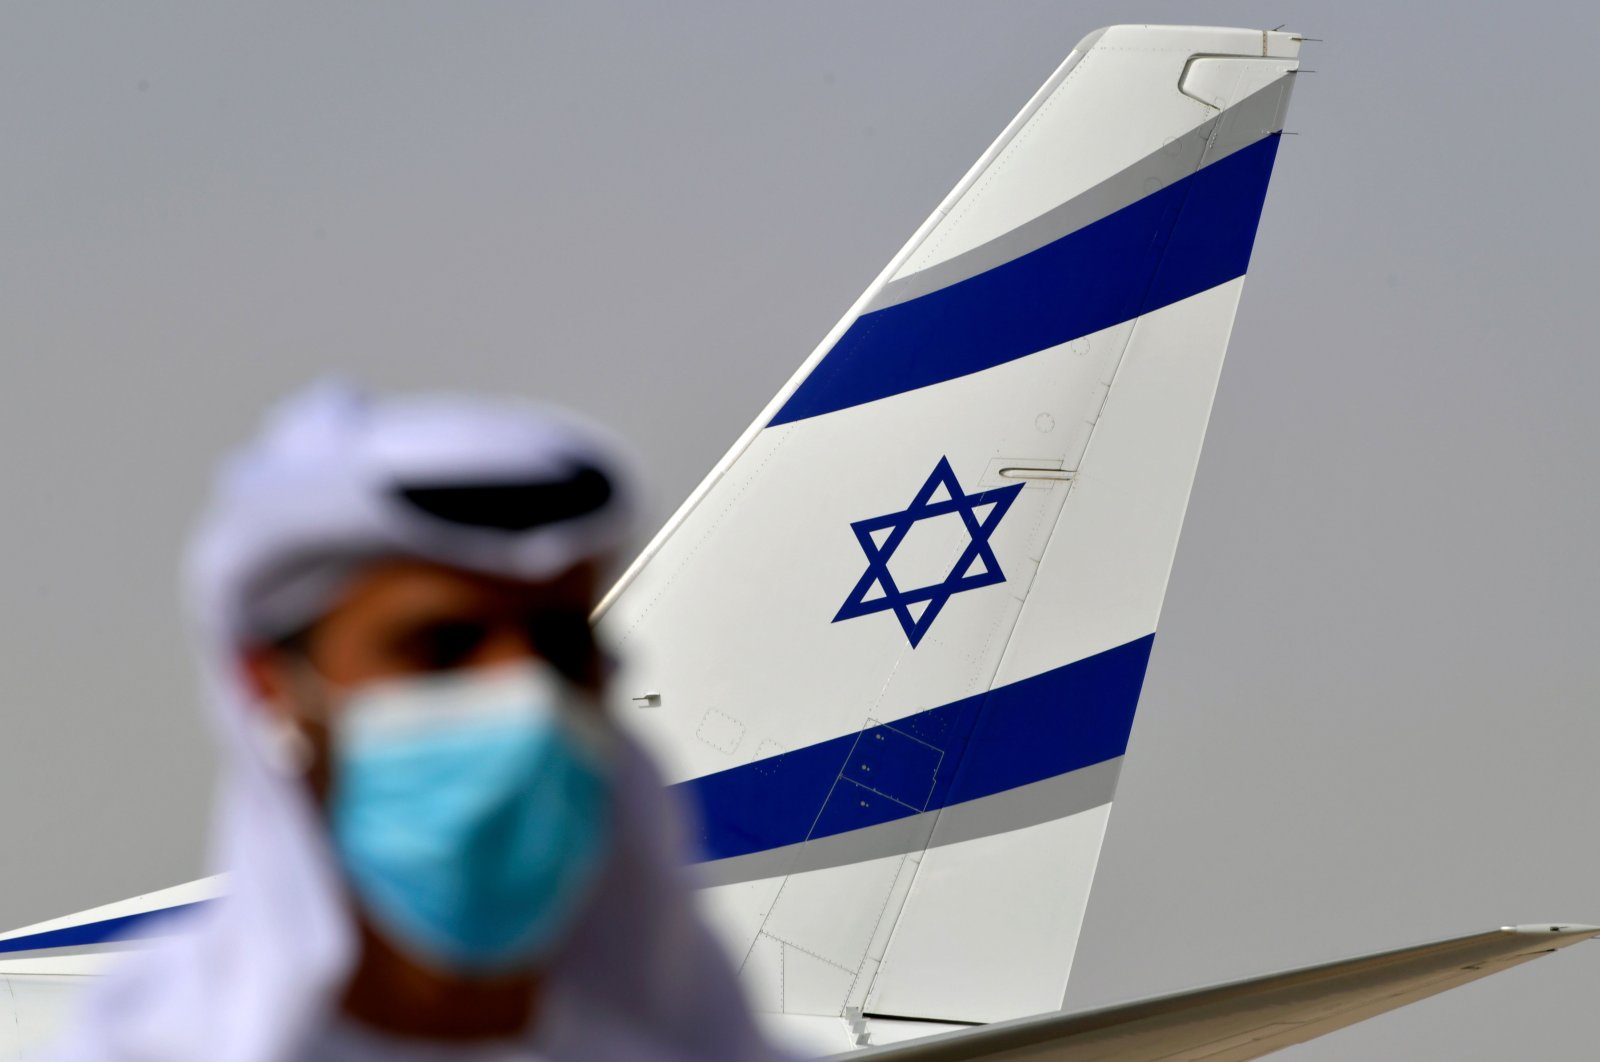 An Emirati official stands near the EI AI plane that carried a U.S.-Israeli delegation to the UAE following a normalization accord, marking the first-ever commercial flight from Israel to the UAE, Abu Dhabi, Aug. 31, 2020. (AFP Photo)